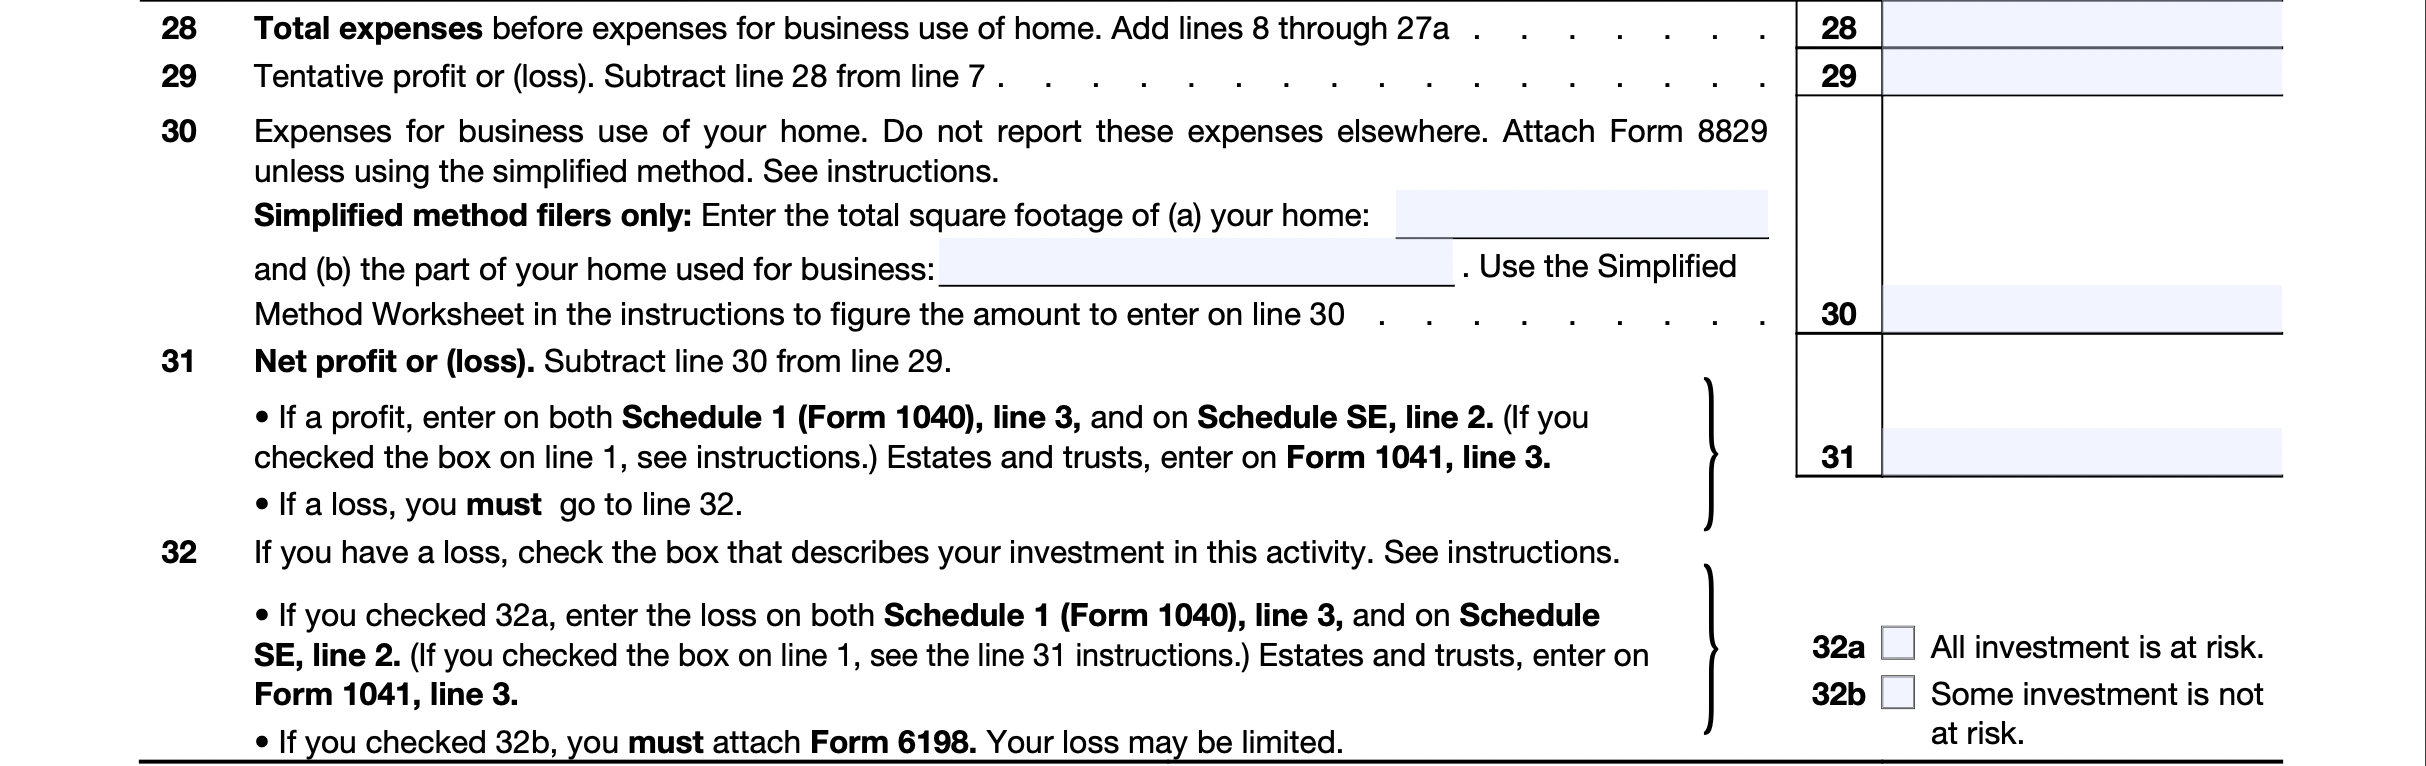 A section of Schedule C, the most important self-employment tax form where are business expense tax deductions are reported.